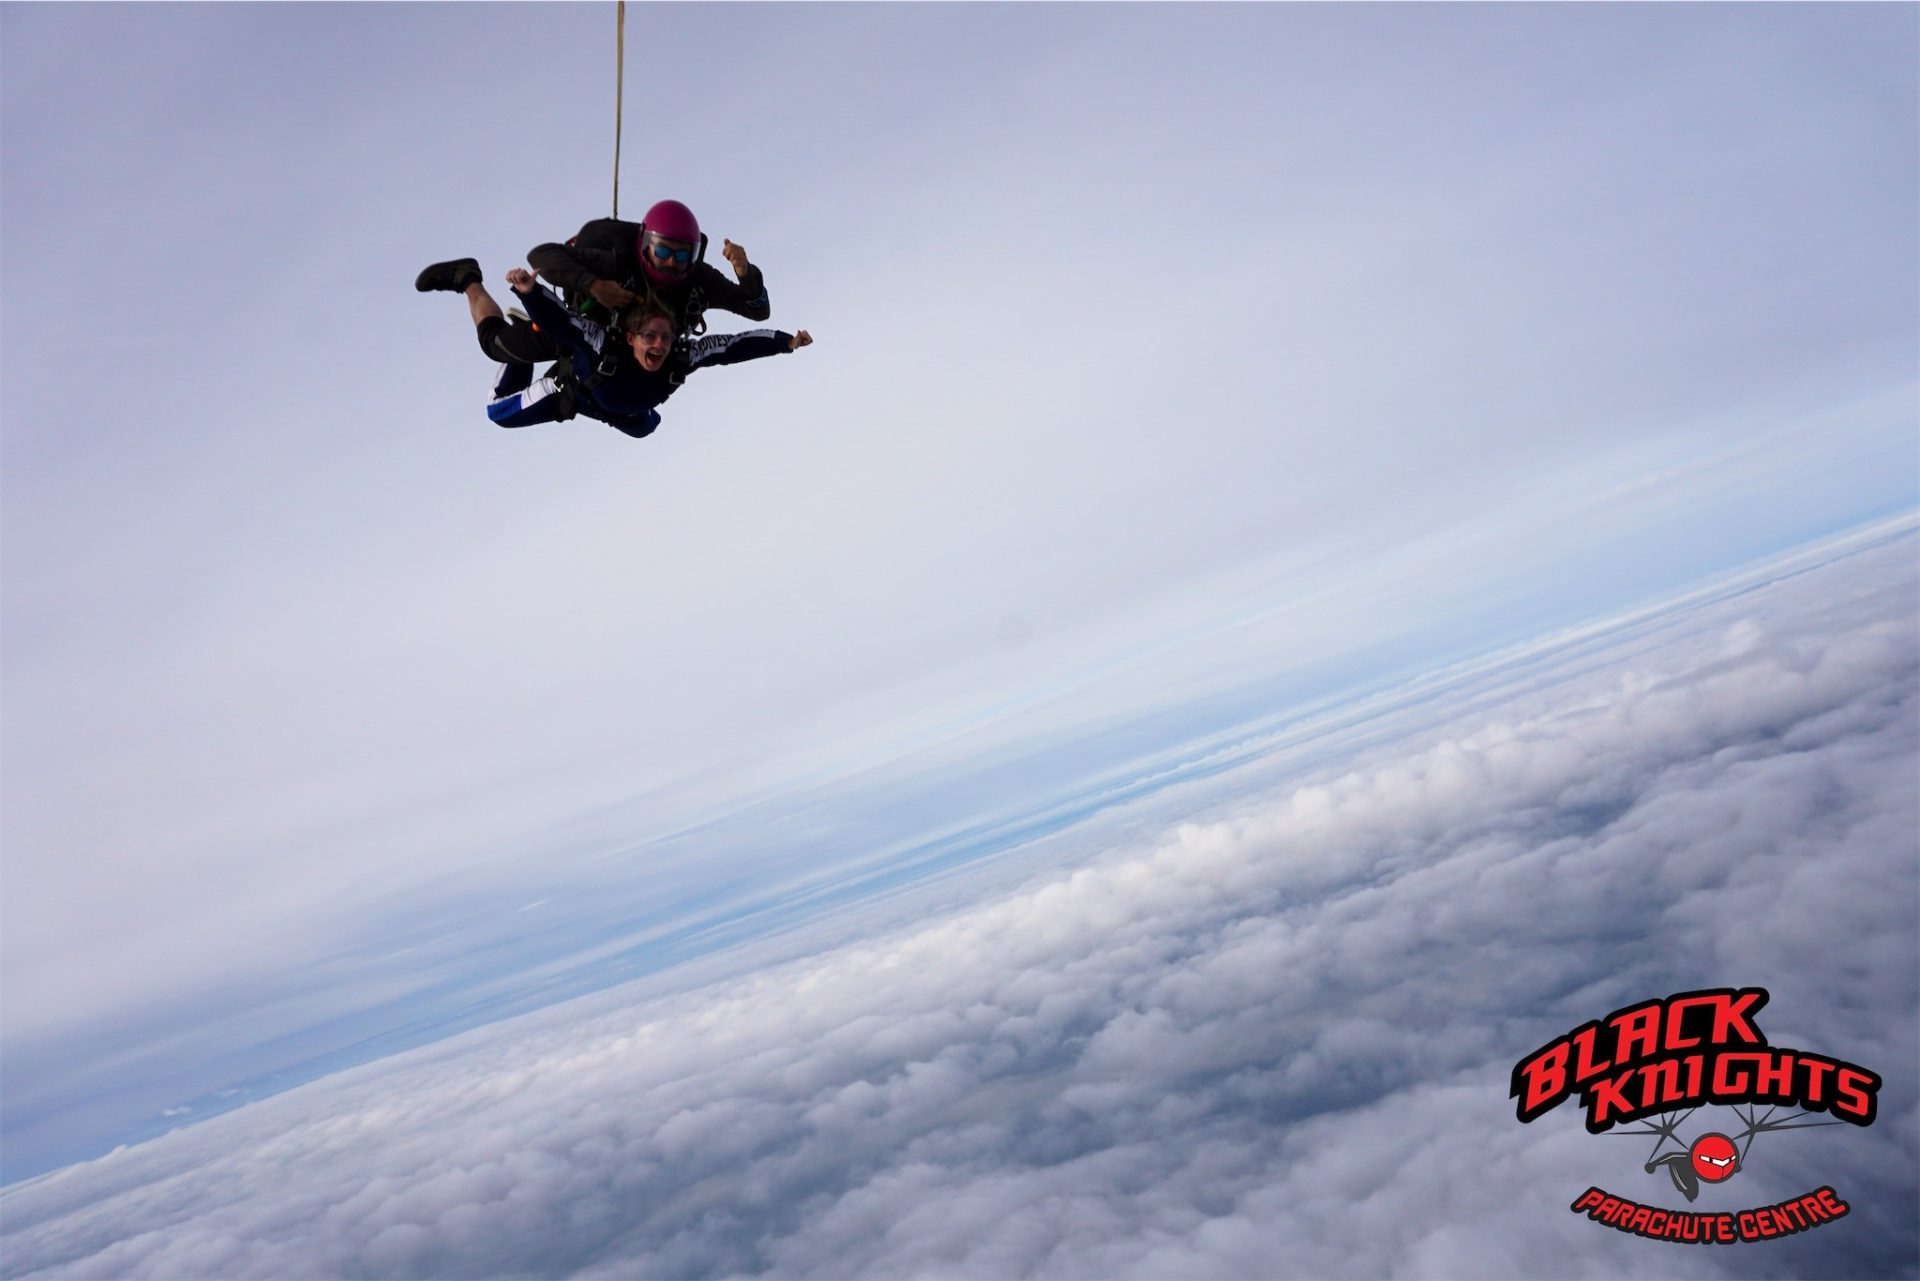 Peninsula Group's Danielle McCabe during her skydive